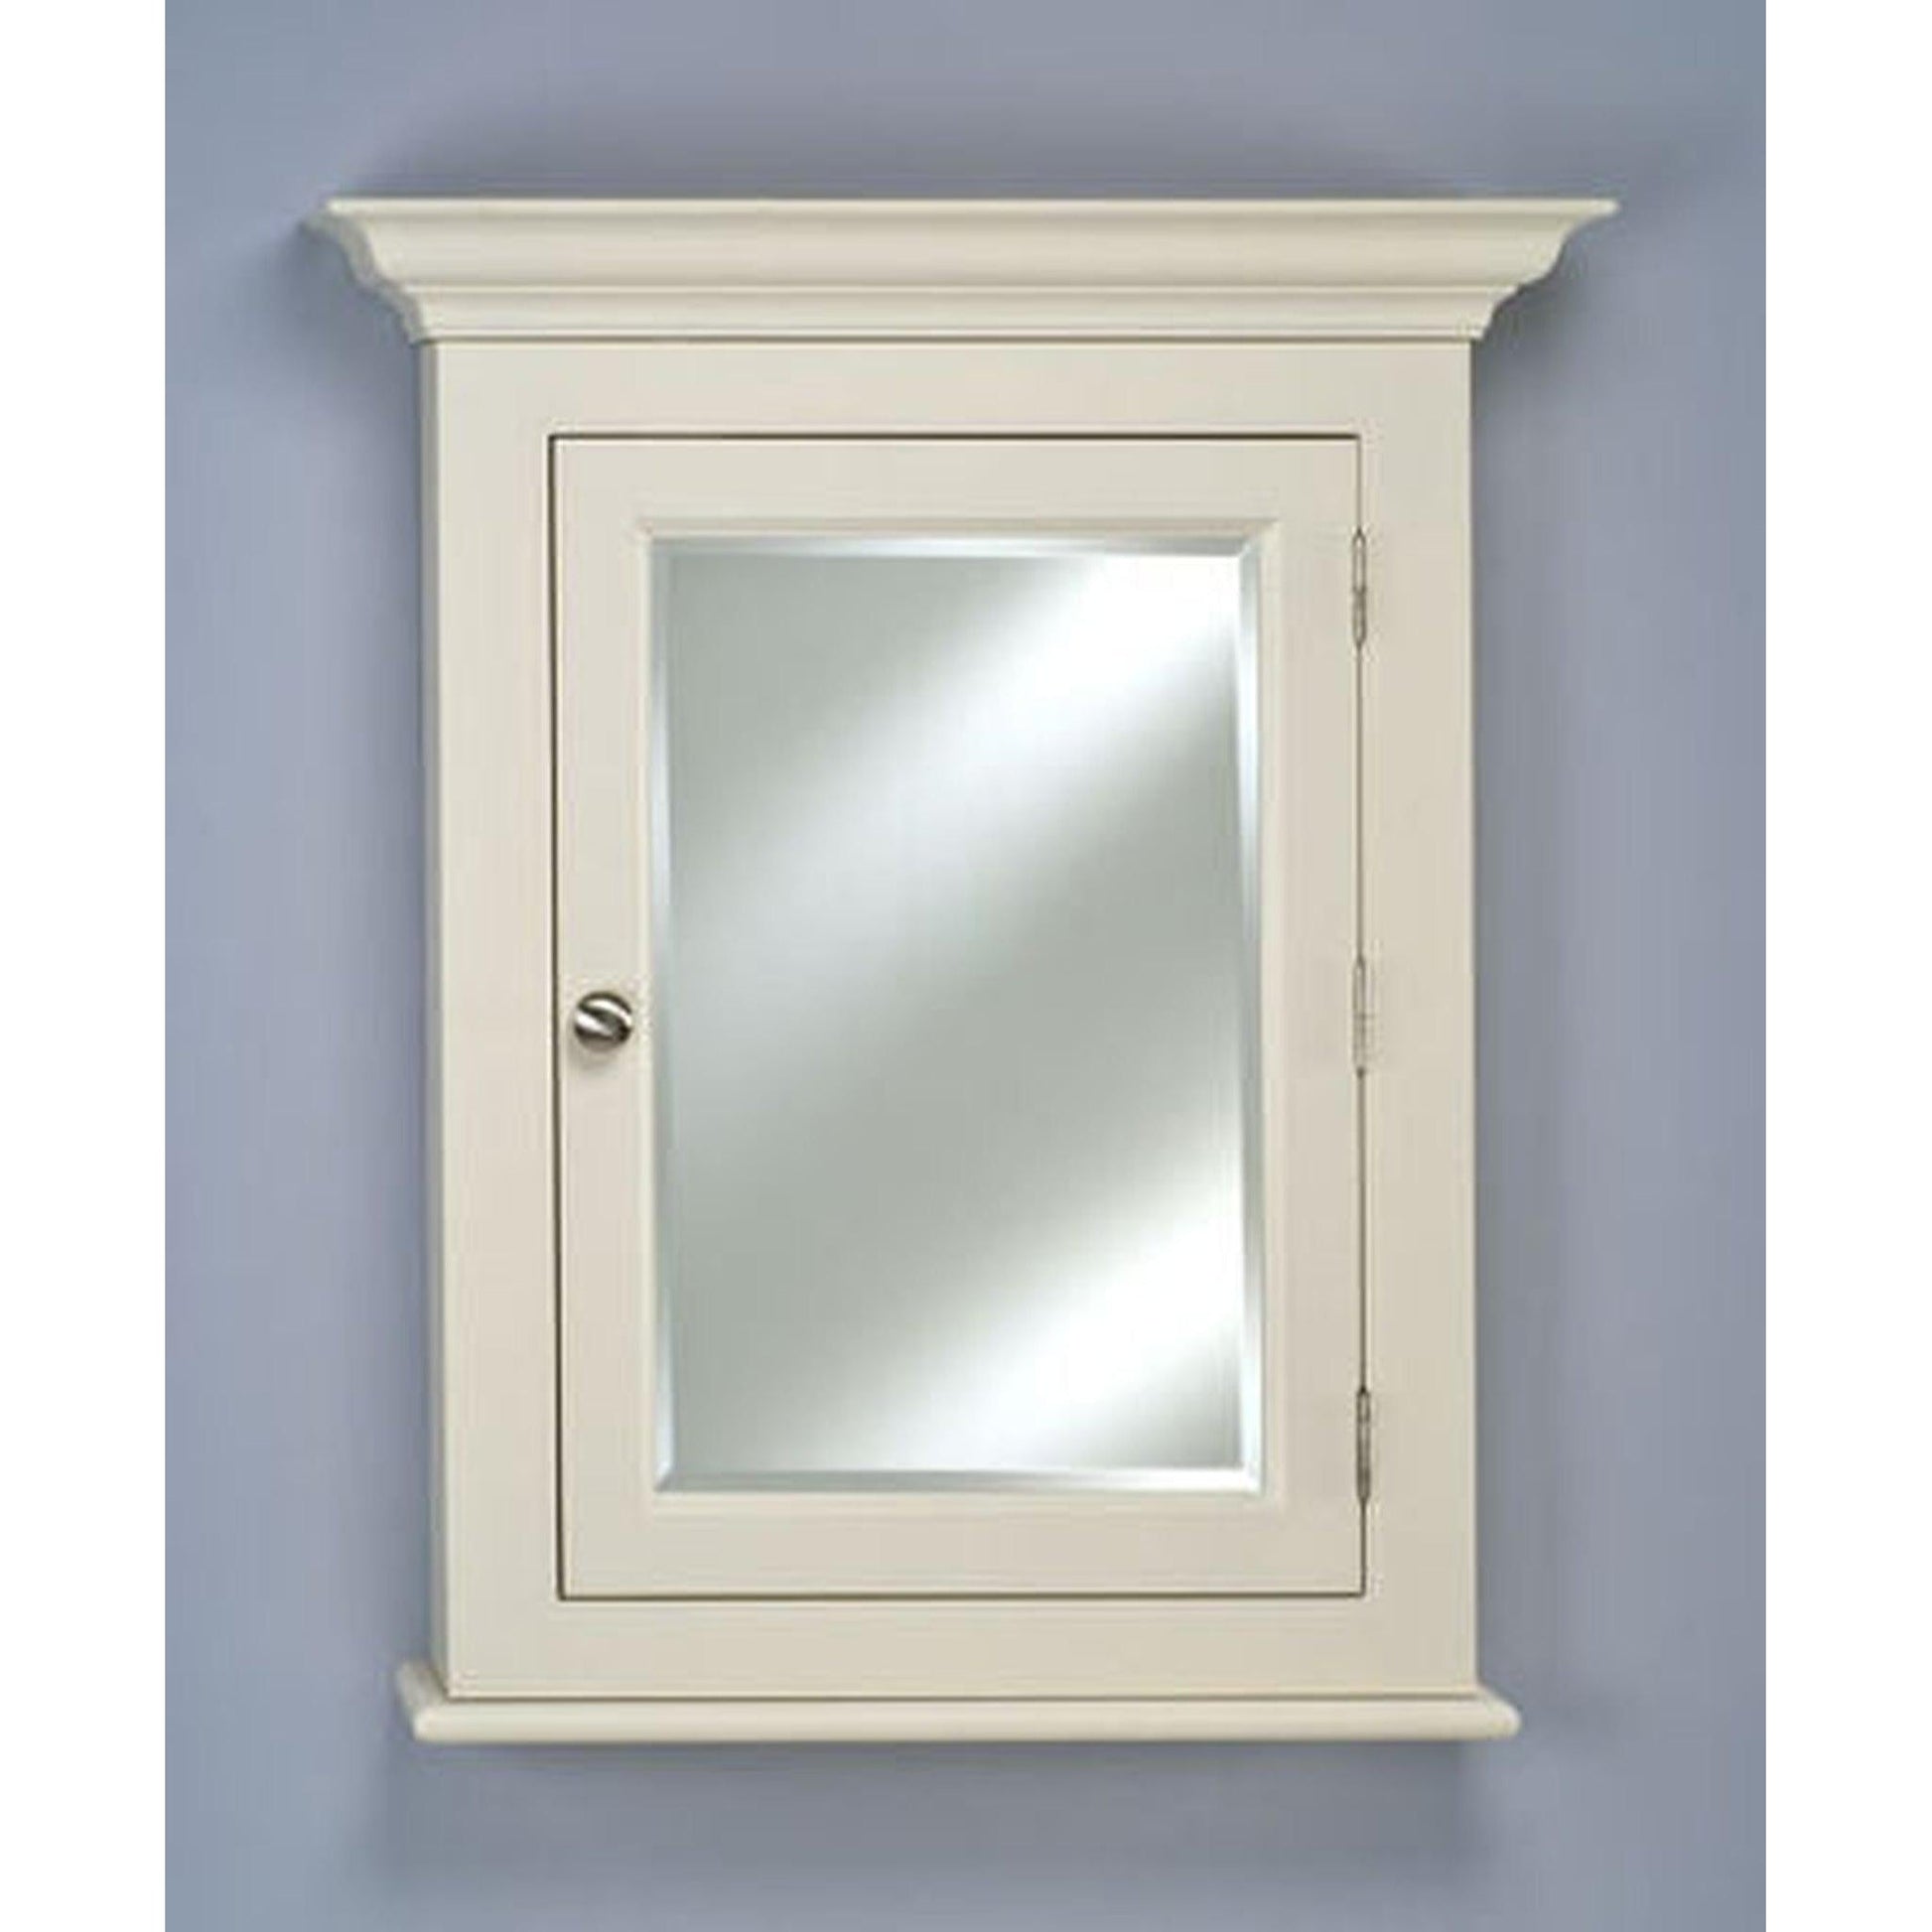 https://usbathstore.com/cdn/shop/products/Afina-Wilshire-I-Small-Biscuit-Surface-Mount-Right-Hinged-Single-Door-Medicine-Cabinet-With-Beveled-Edge-Mirror-2.jpg?v=1675783311&width=1946